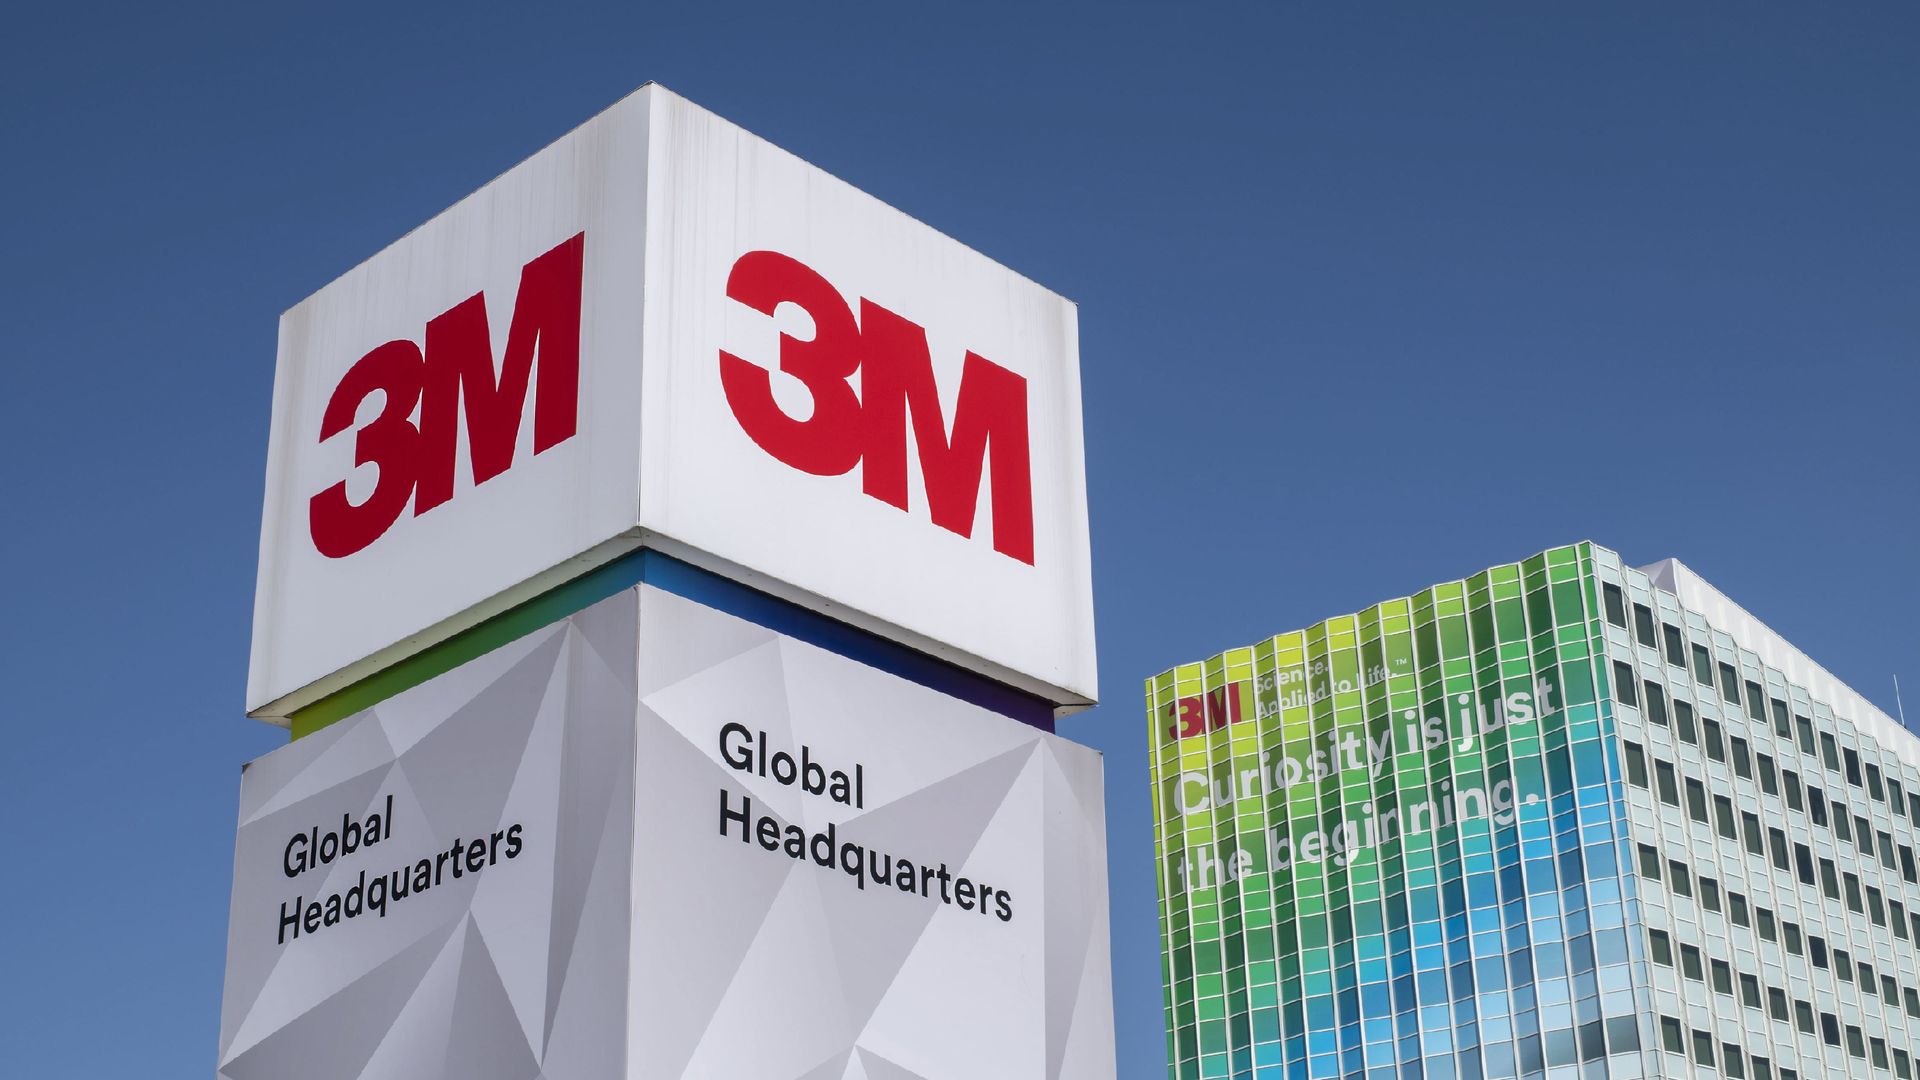 East metro officials want to make a play for 3M spinoff - Axios Twin Cities